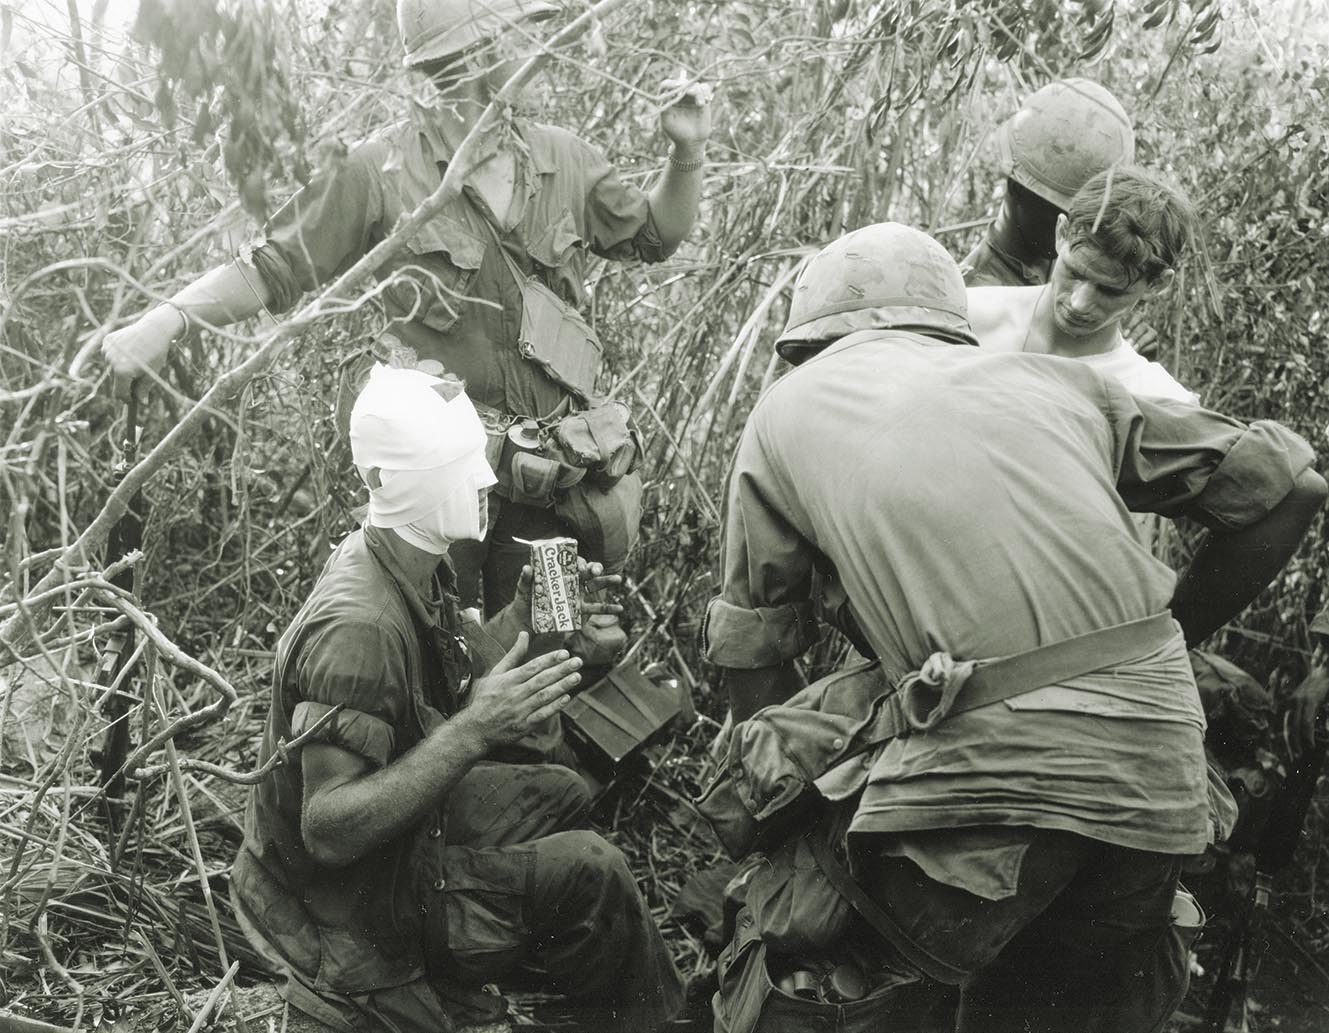 Members of Delta Company discuss their battles and receive treatment for the wounds they received during the fighting near Tam Ky on Aug. 12, 1969. A box of Cracker Jack from back home aids in one soldier’s recovery. / ProQuest photo, Getty Images